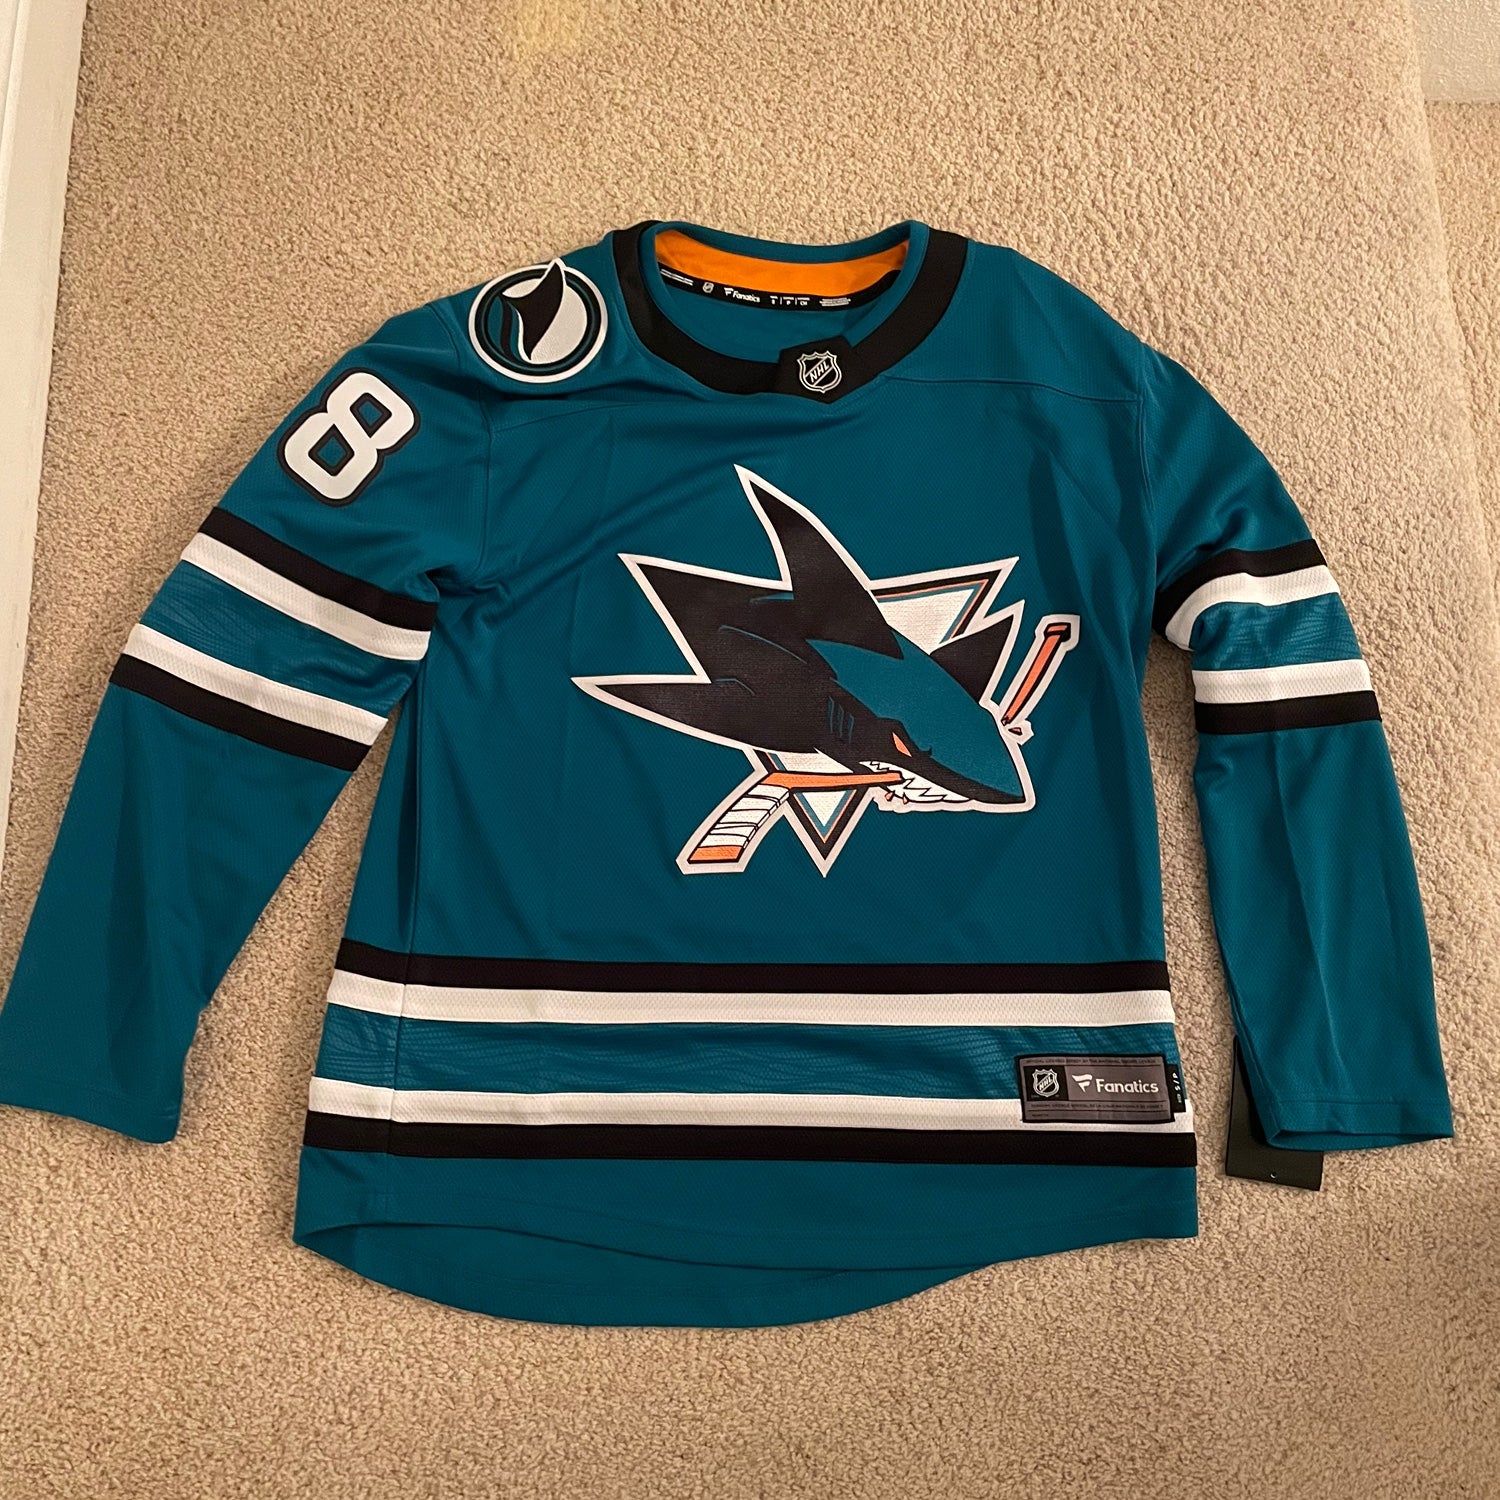 Brent Burns San Jose Sharks Game-Used 2018 All-Star Game Jersey